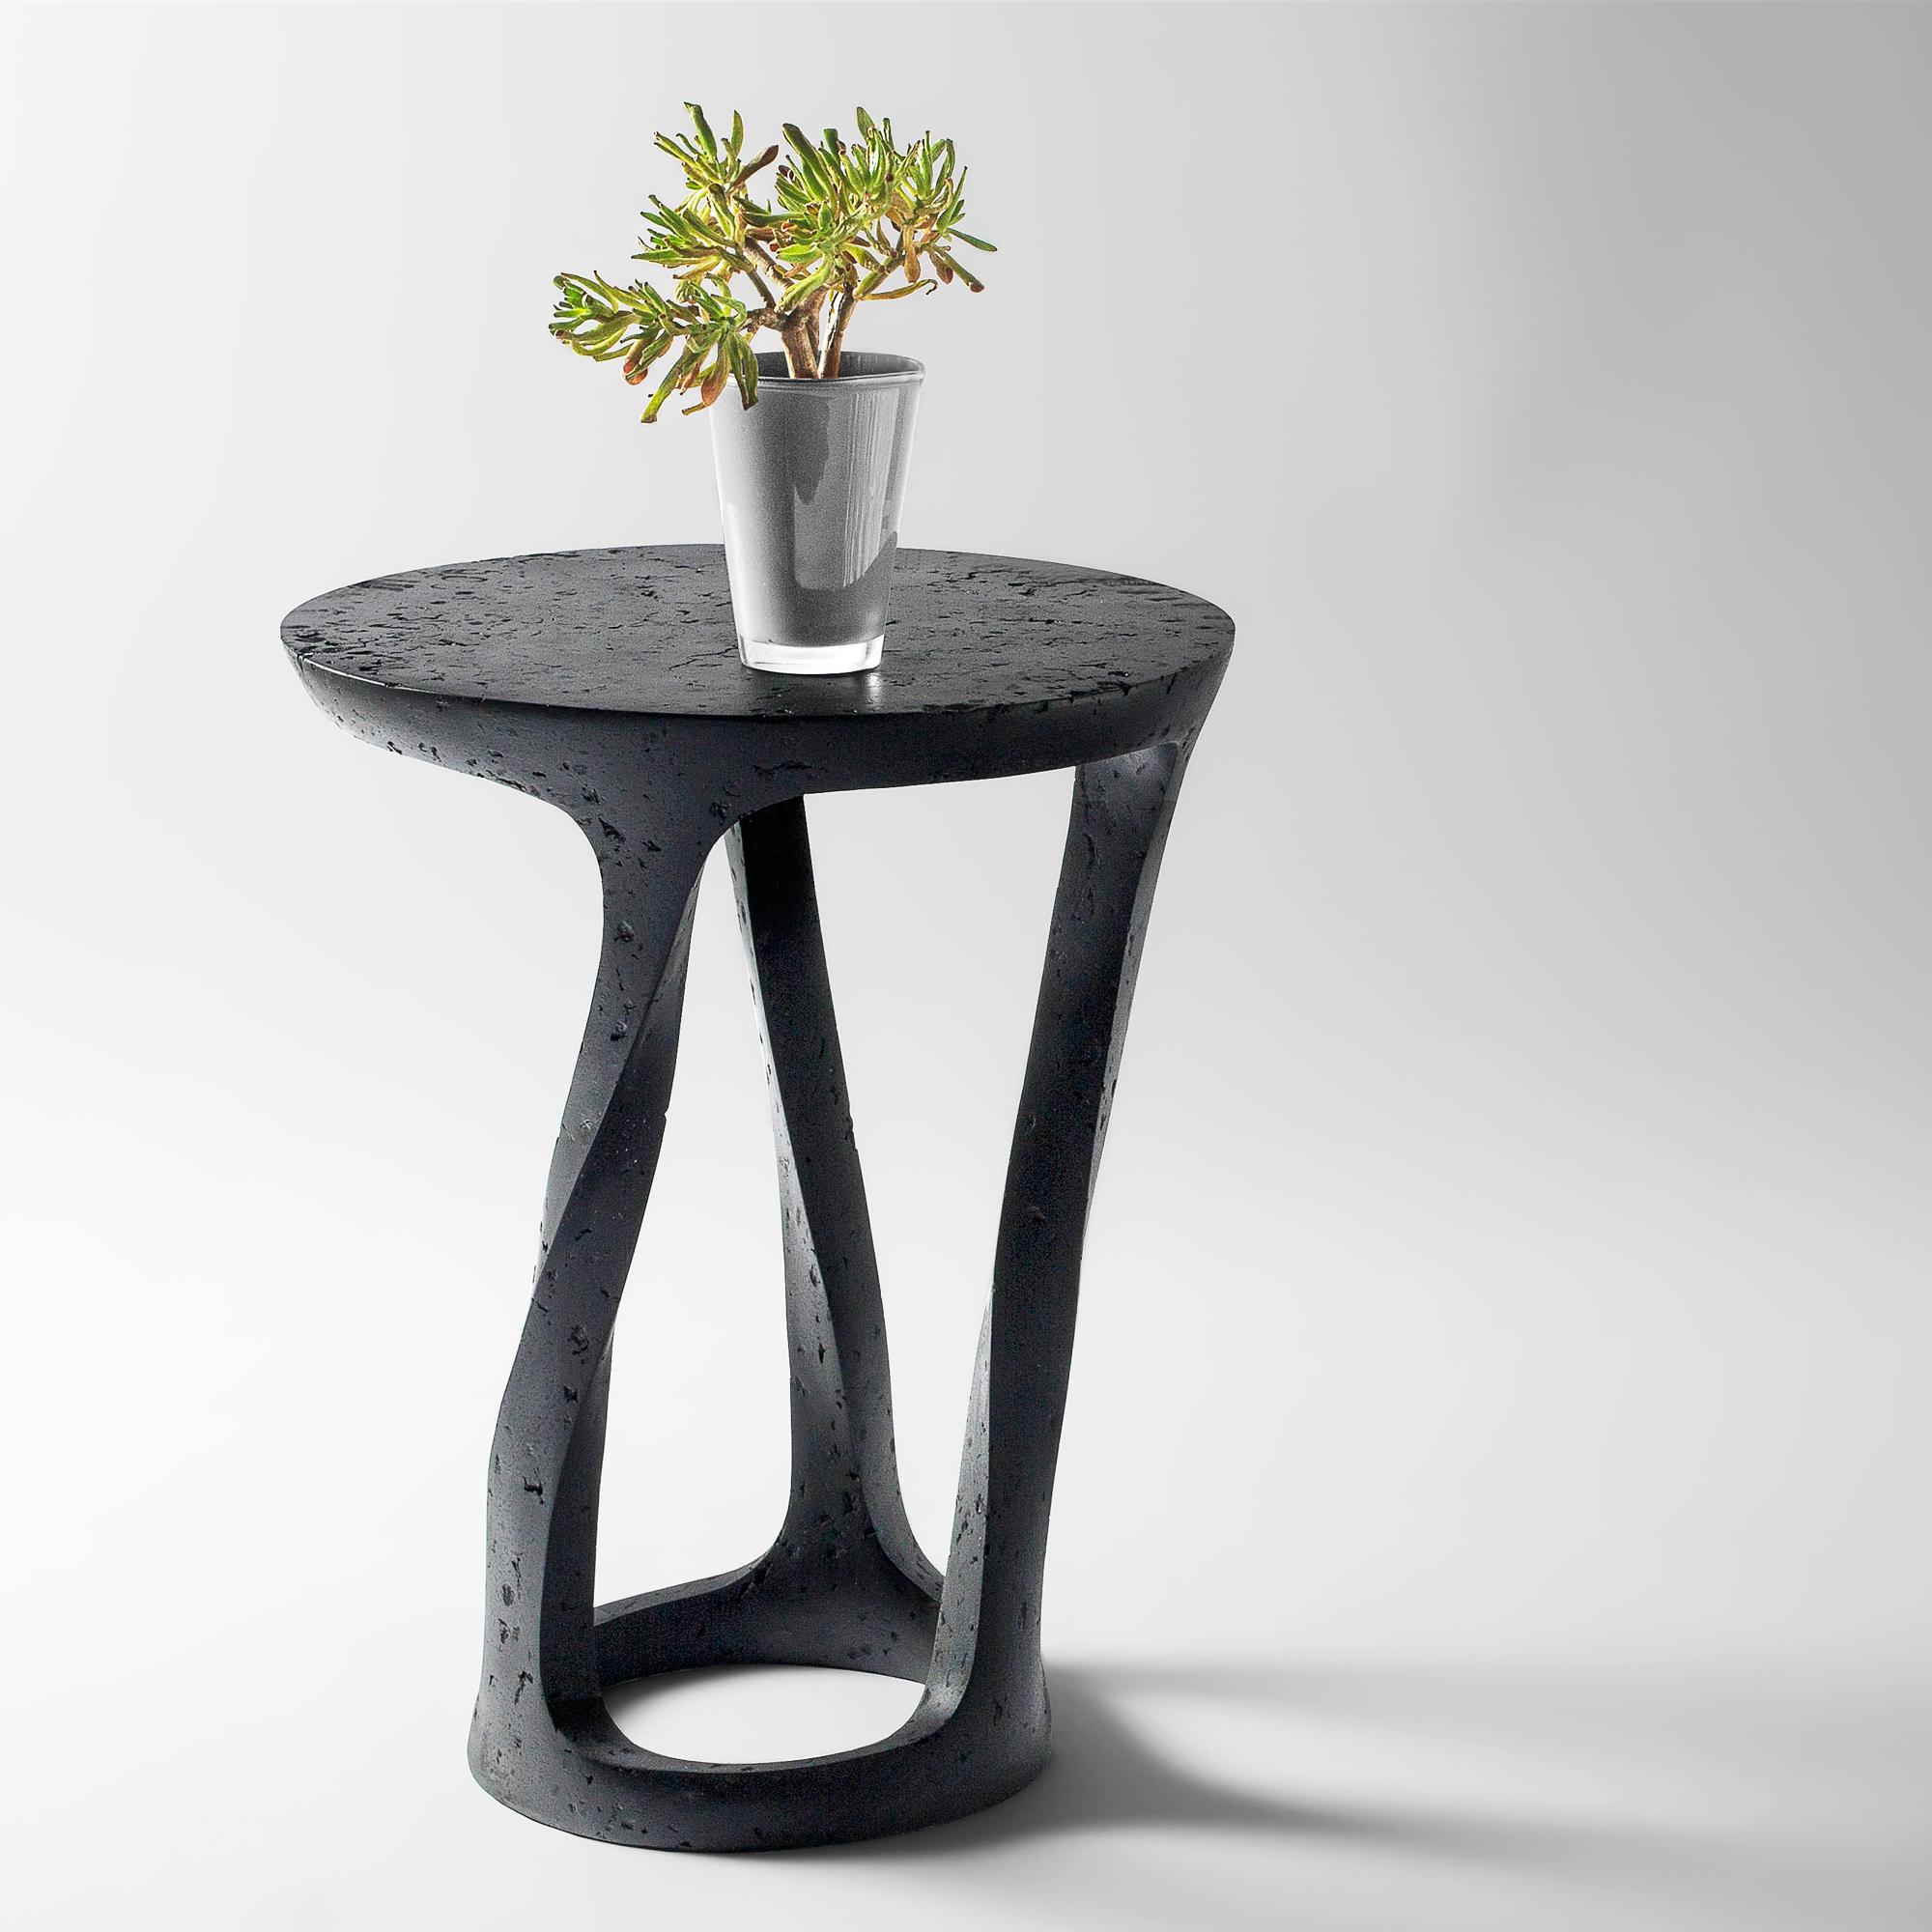 Modern Black contemporary side table, interior accent by Donatas Žukauskas For Sale